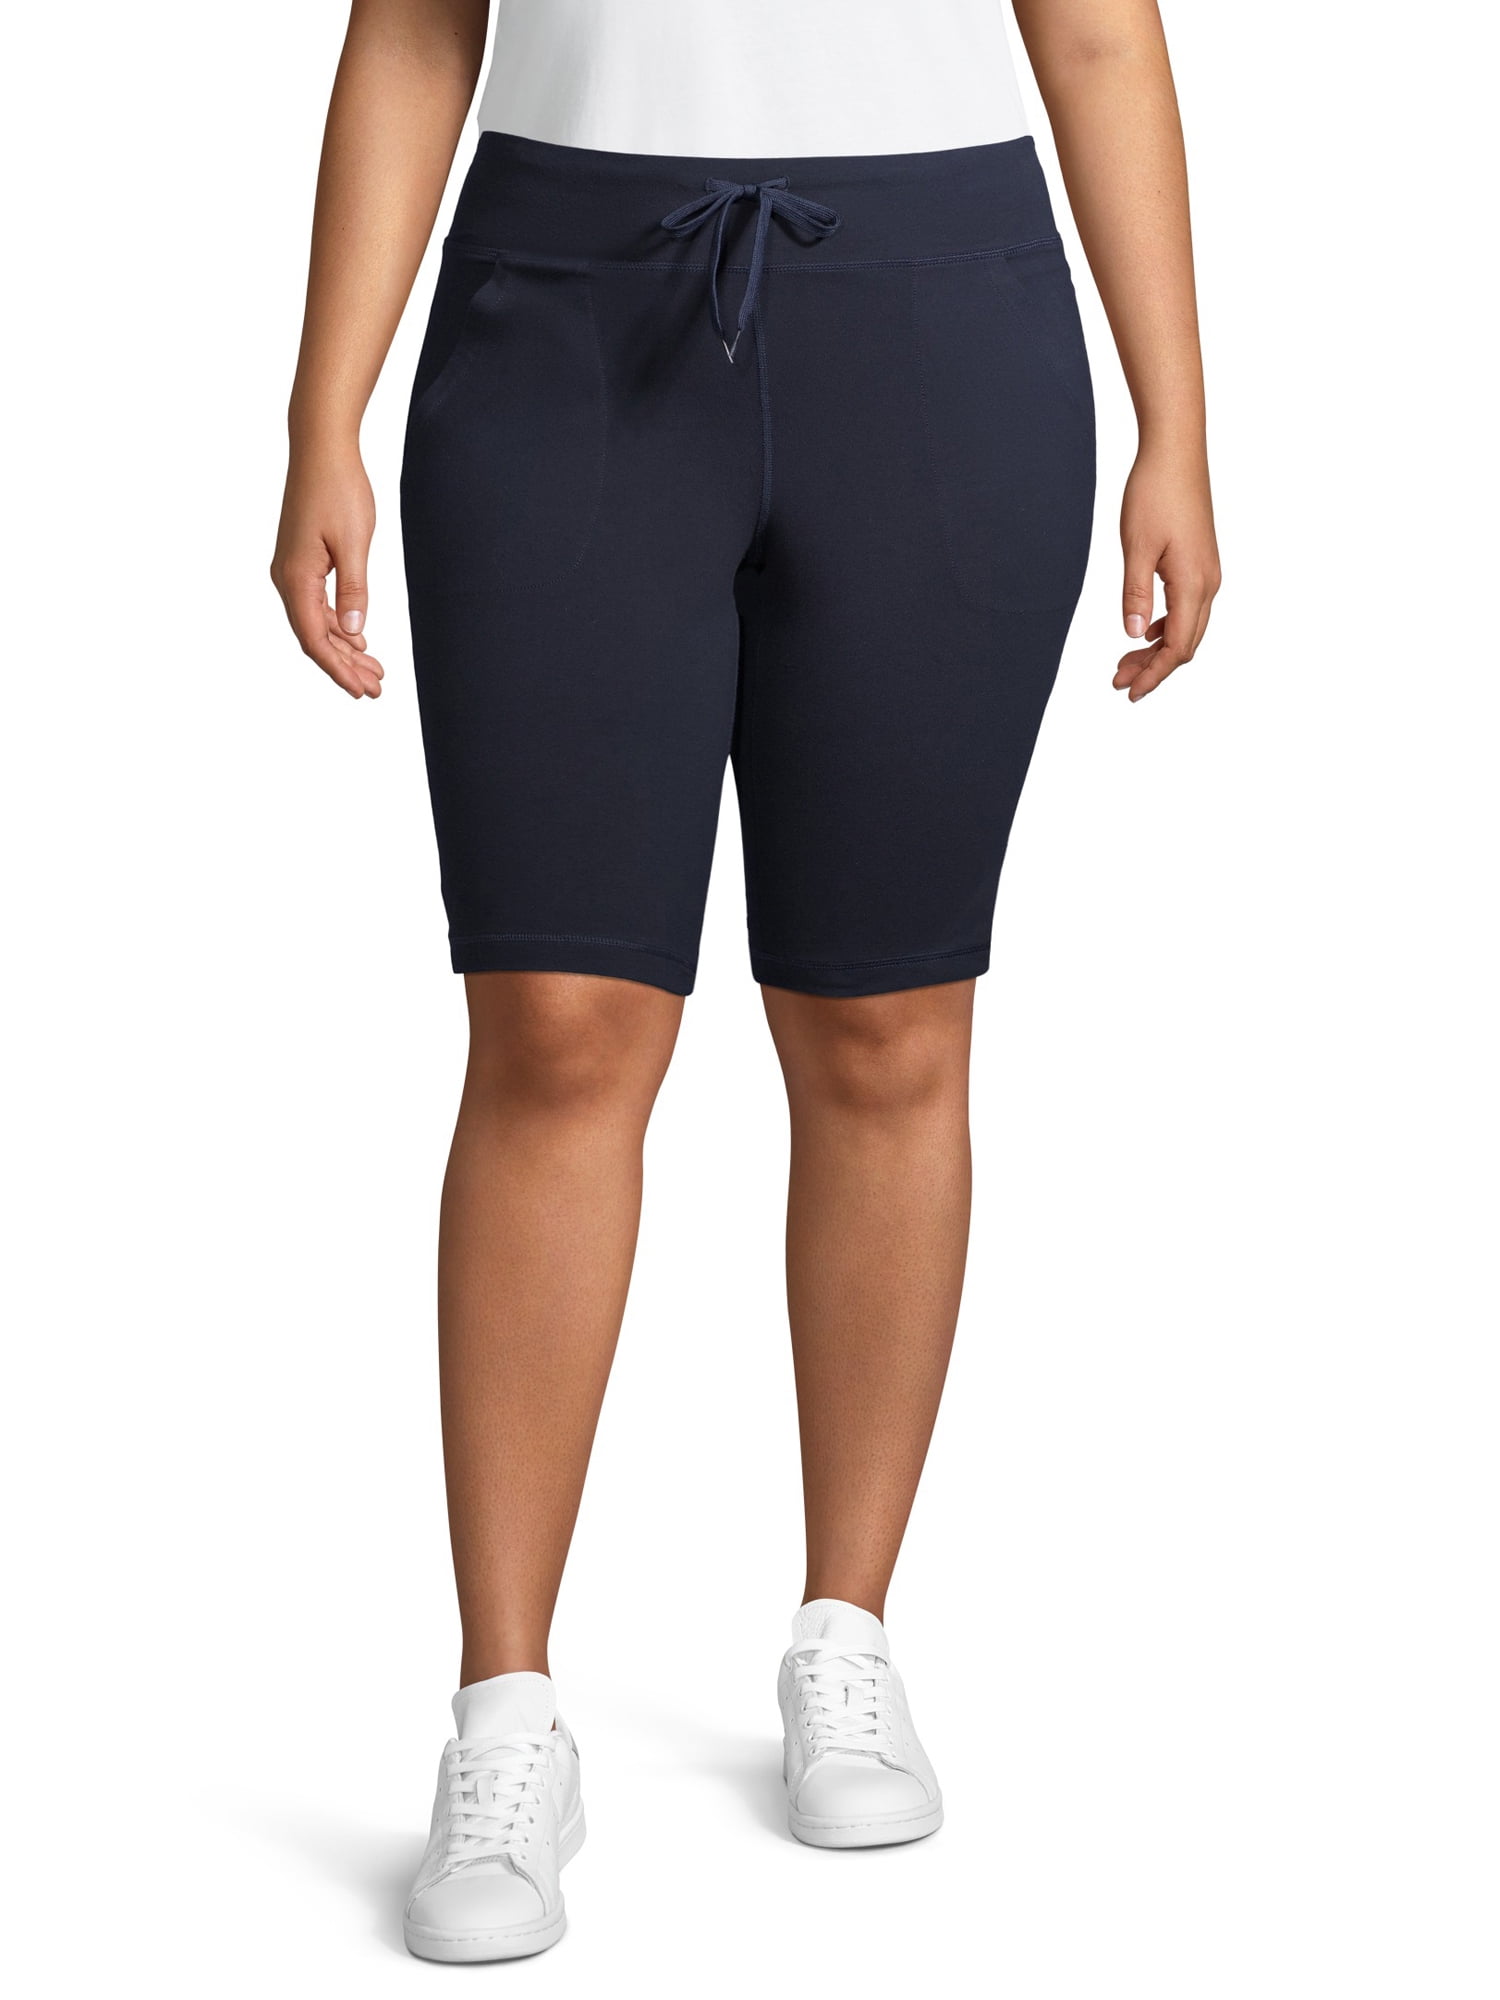 Athletic Works - Athletic Works Women's Plus Size 12